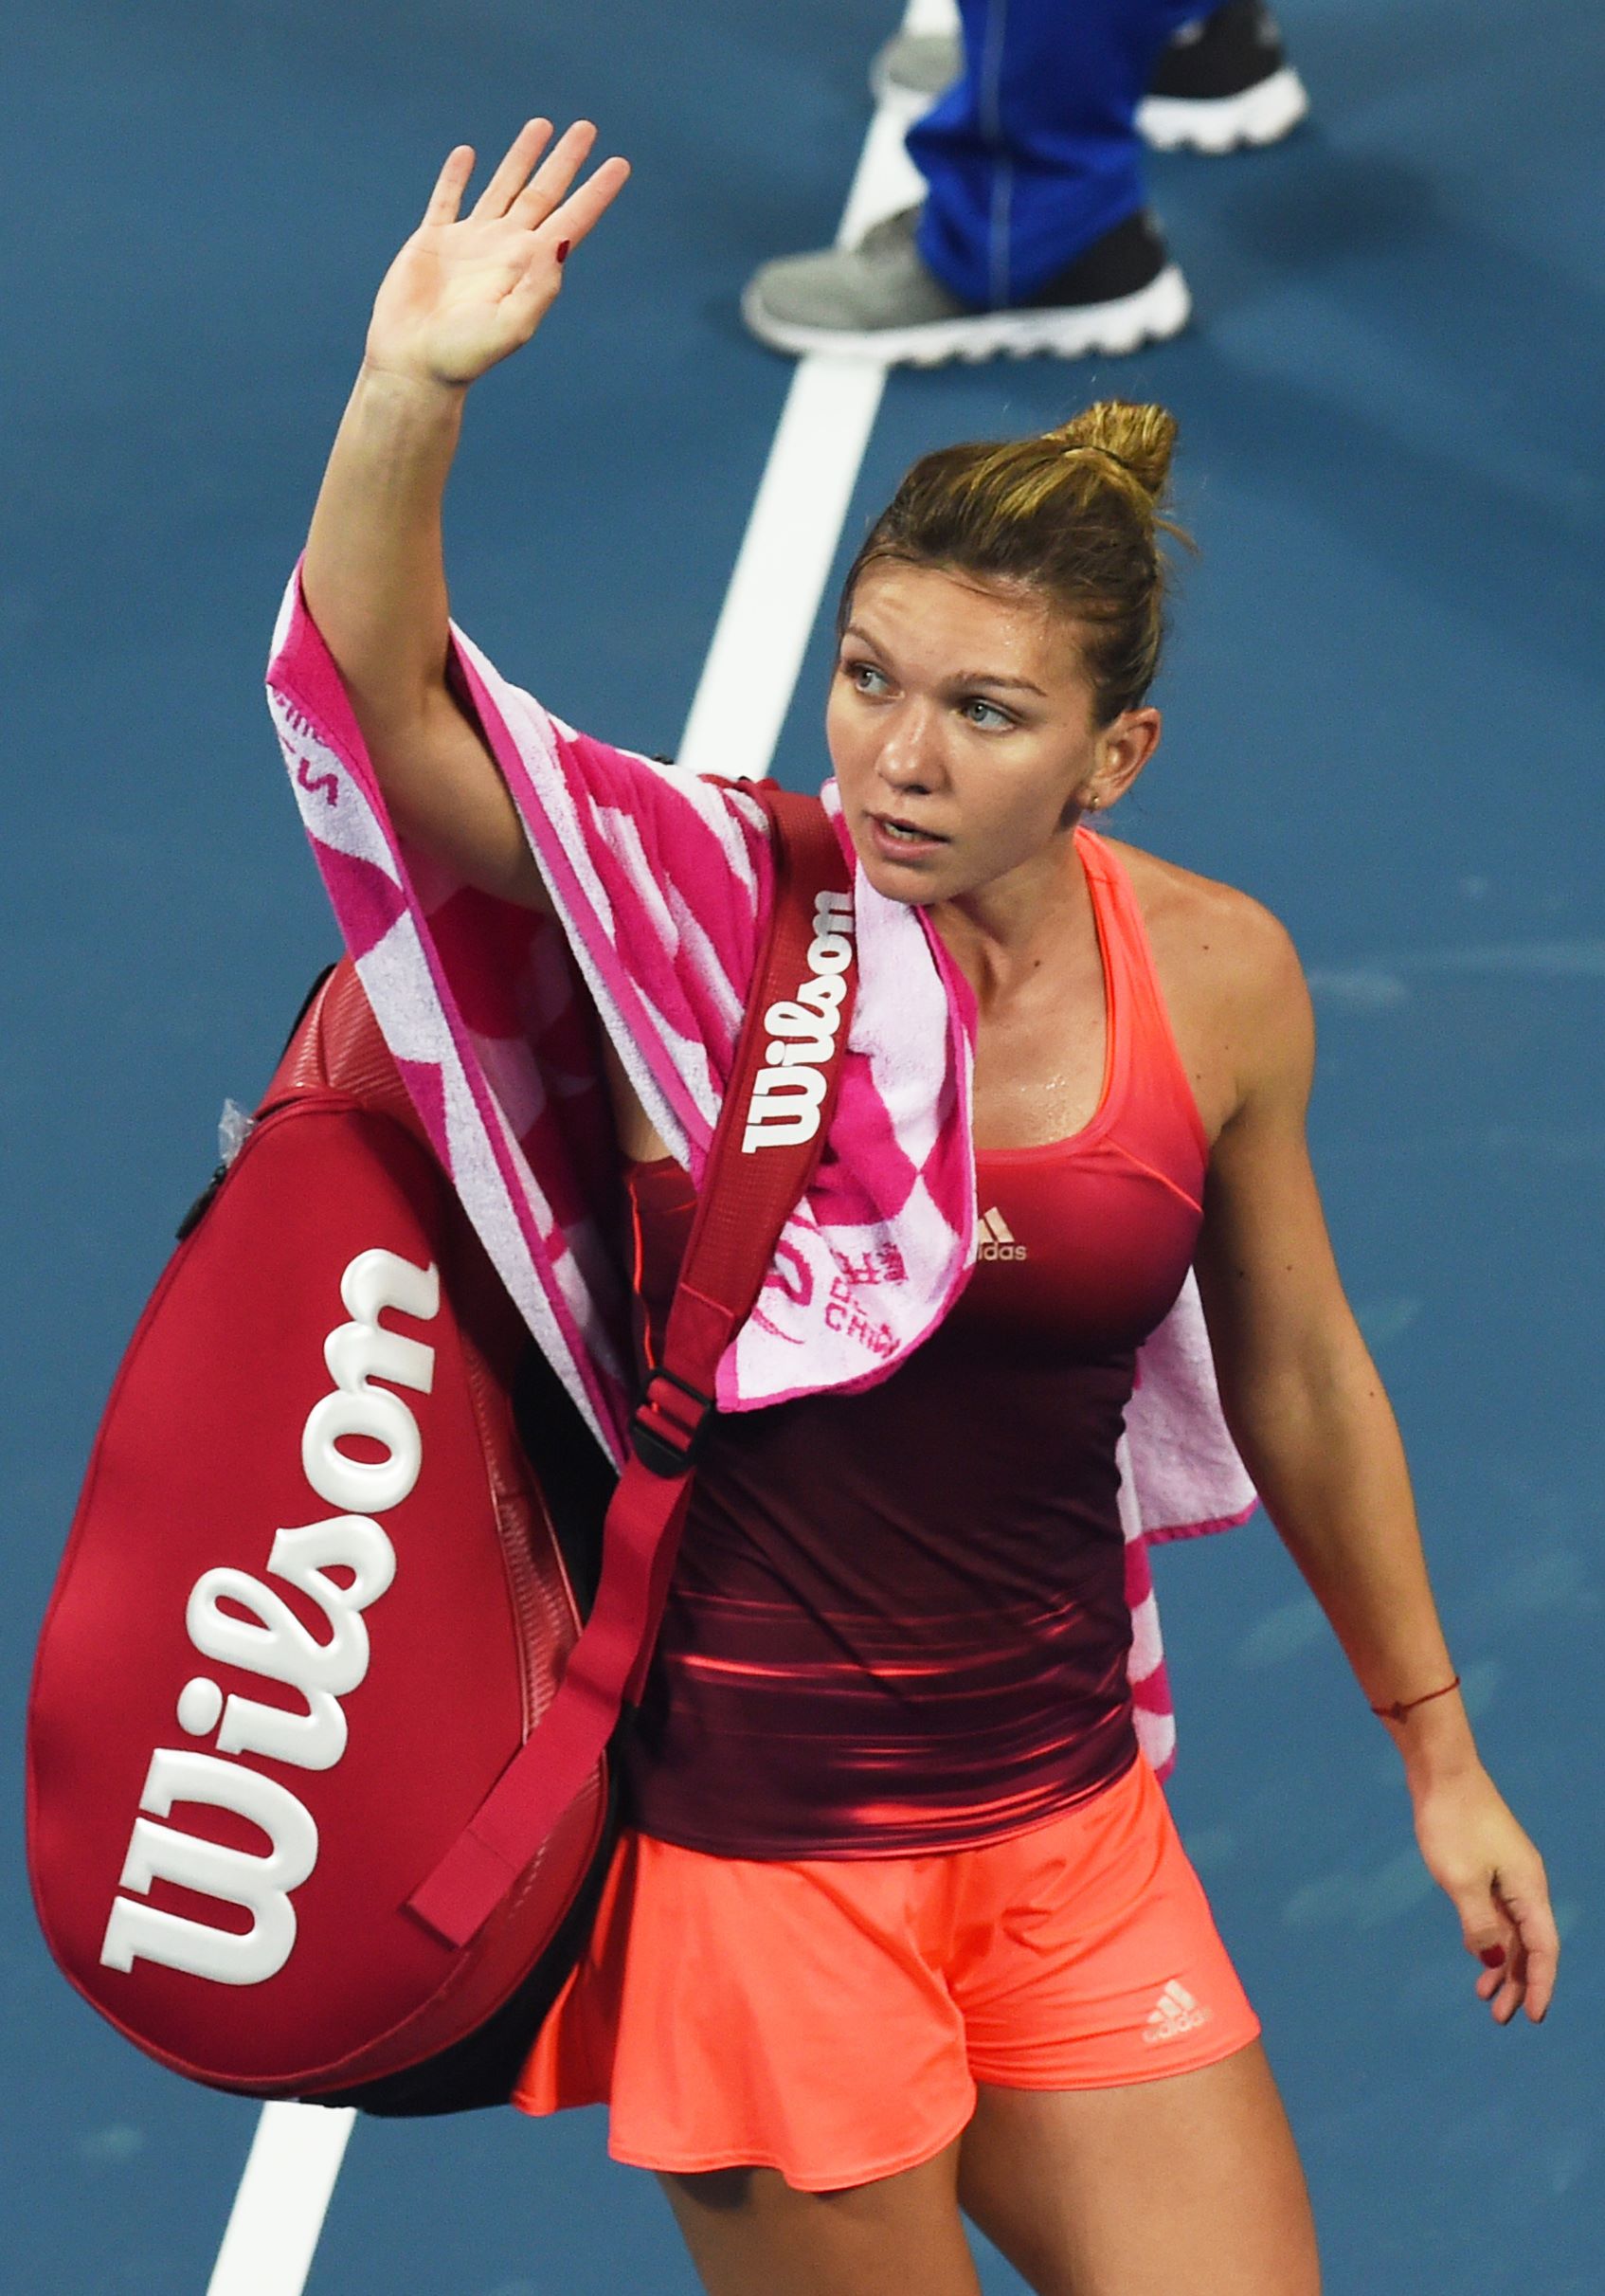 Simona Halep of Romania waves to the crowd after retiring from her first round women's singles match against Lara Arruabarrena of Spain at the China Open tennis tournament in Beijing on October 4, 2015. AFP PHOTO / GREG BAKER